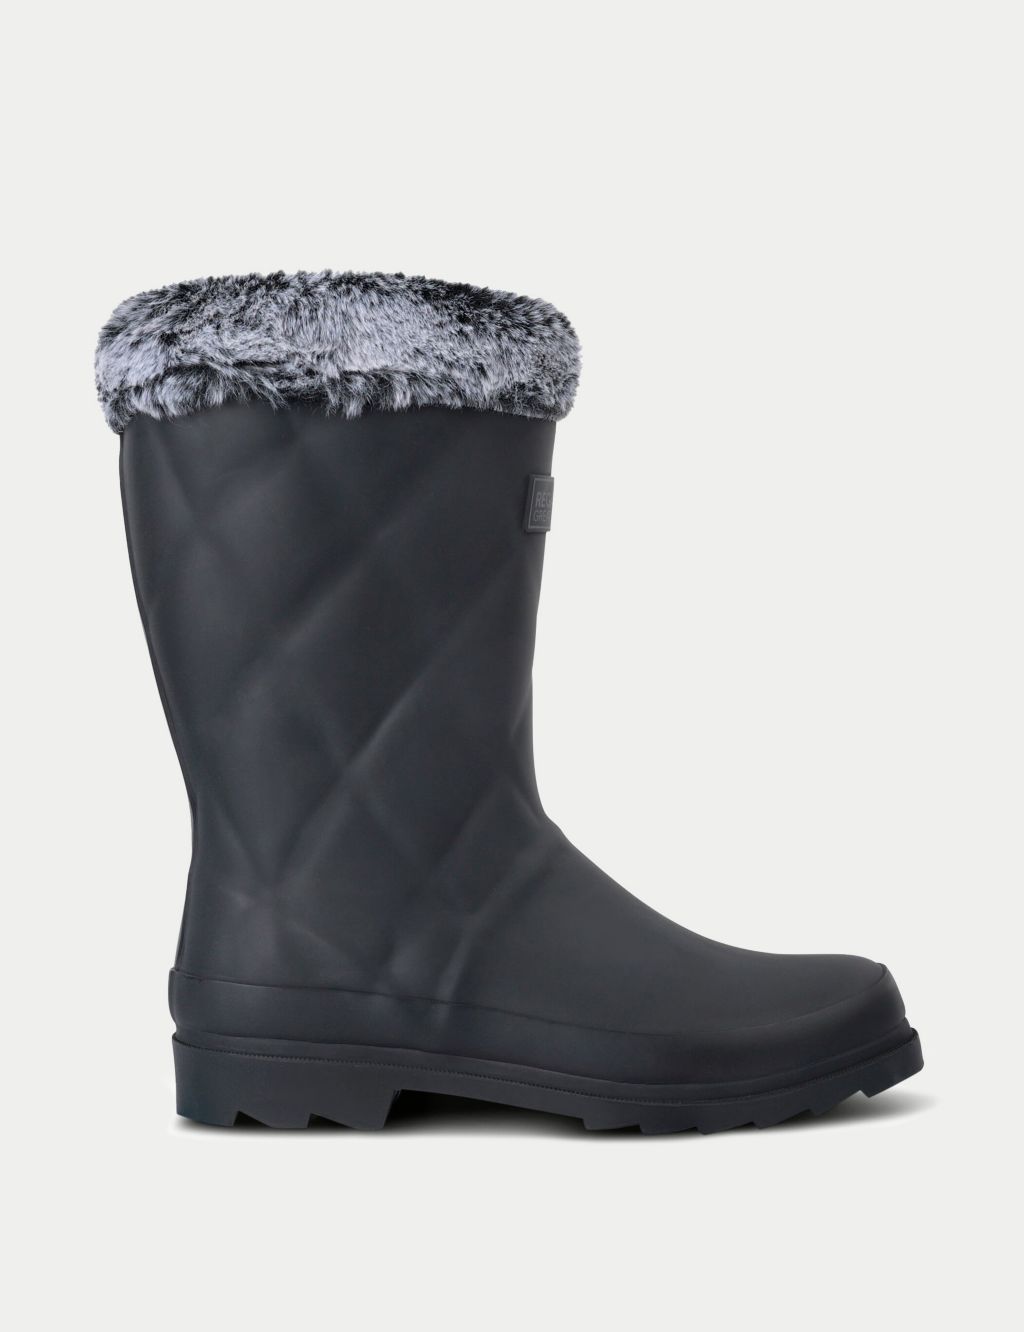 Luxley Quilted Faux Fur Trim Wellies